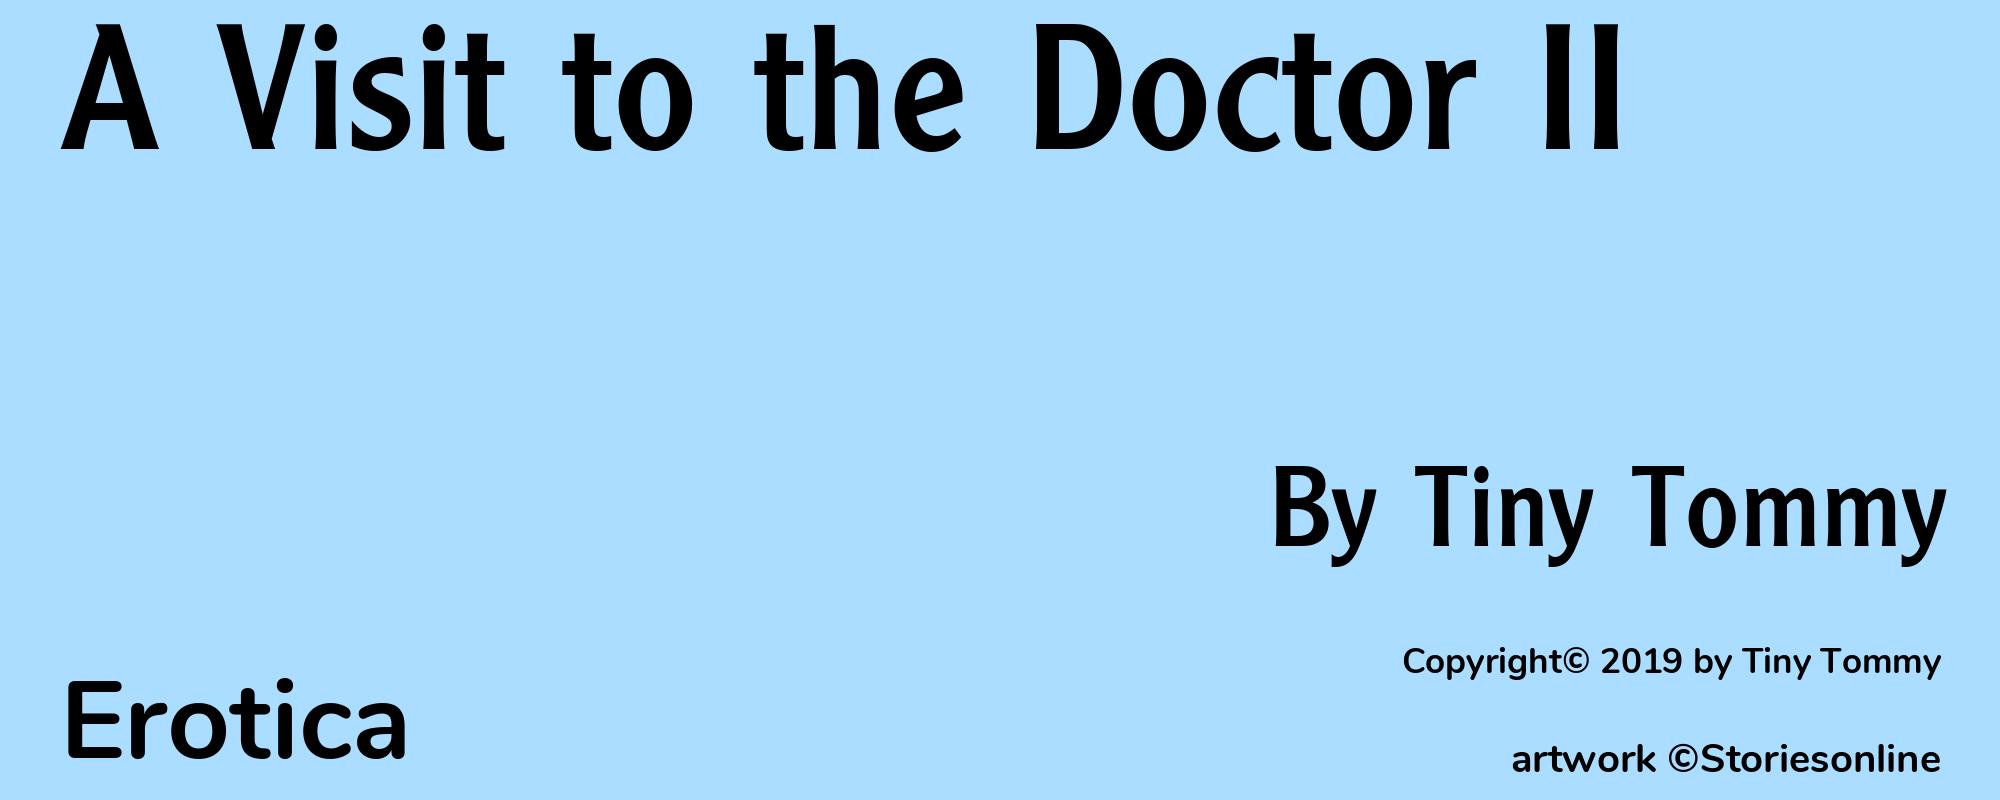 A Visit to the Doctor II - Cover